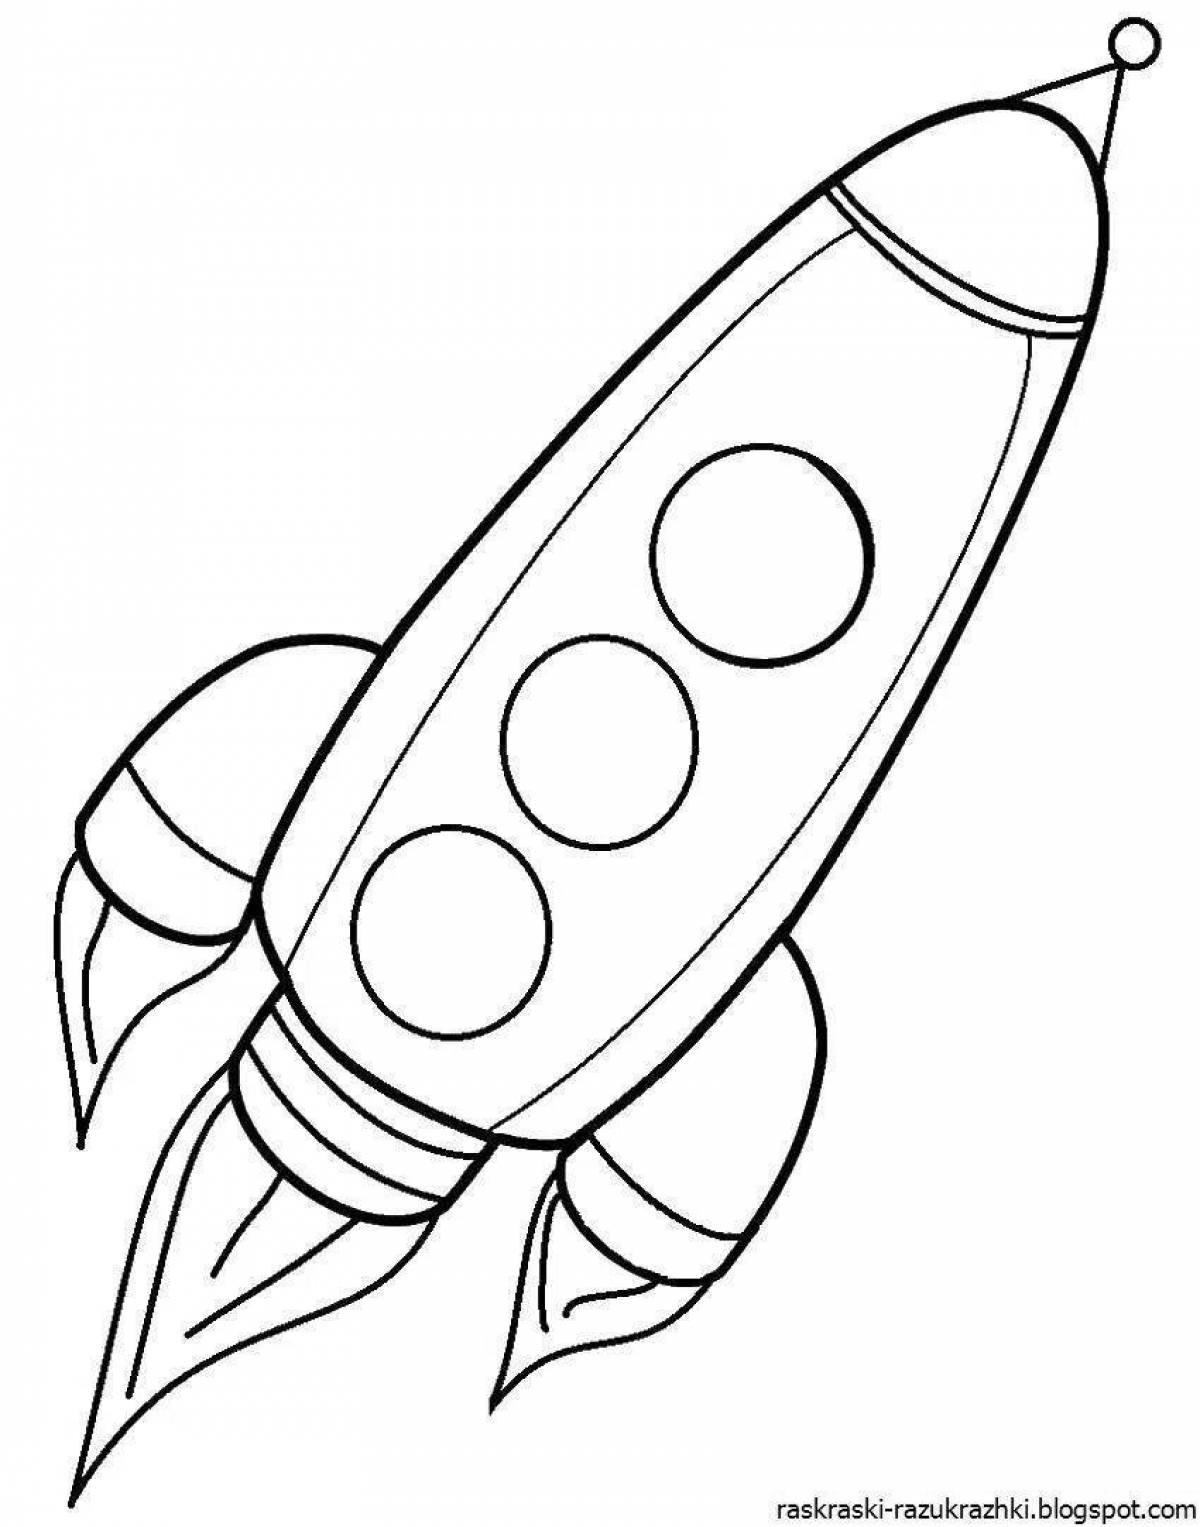 Fun coloring rocket for 4-5 year olds